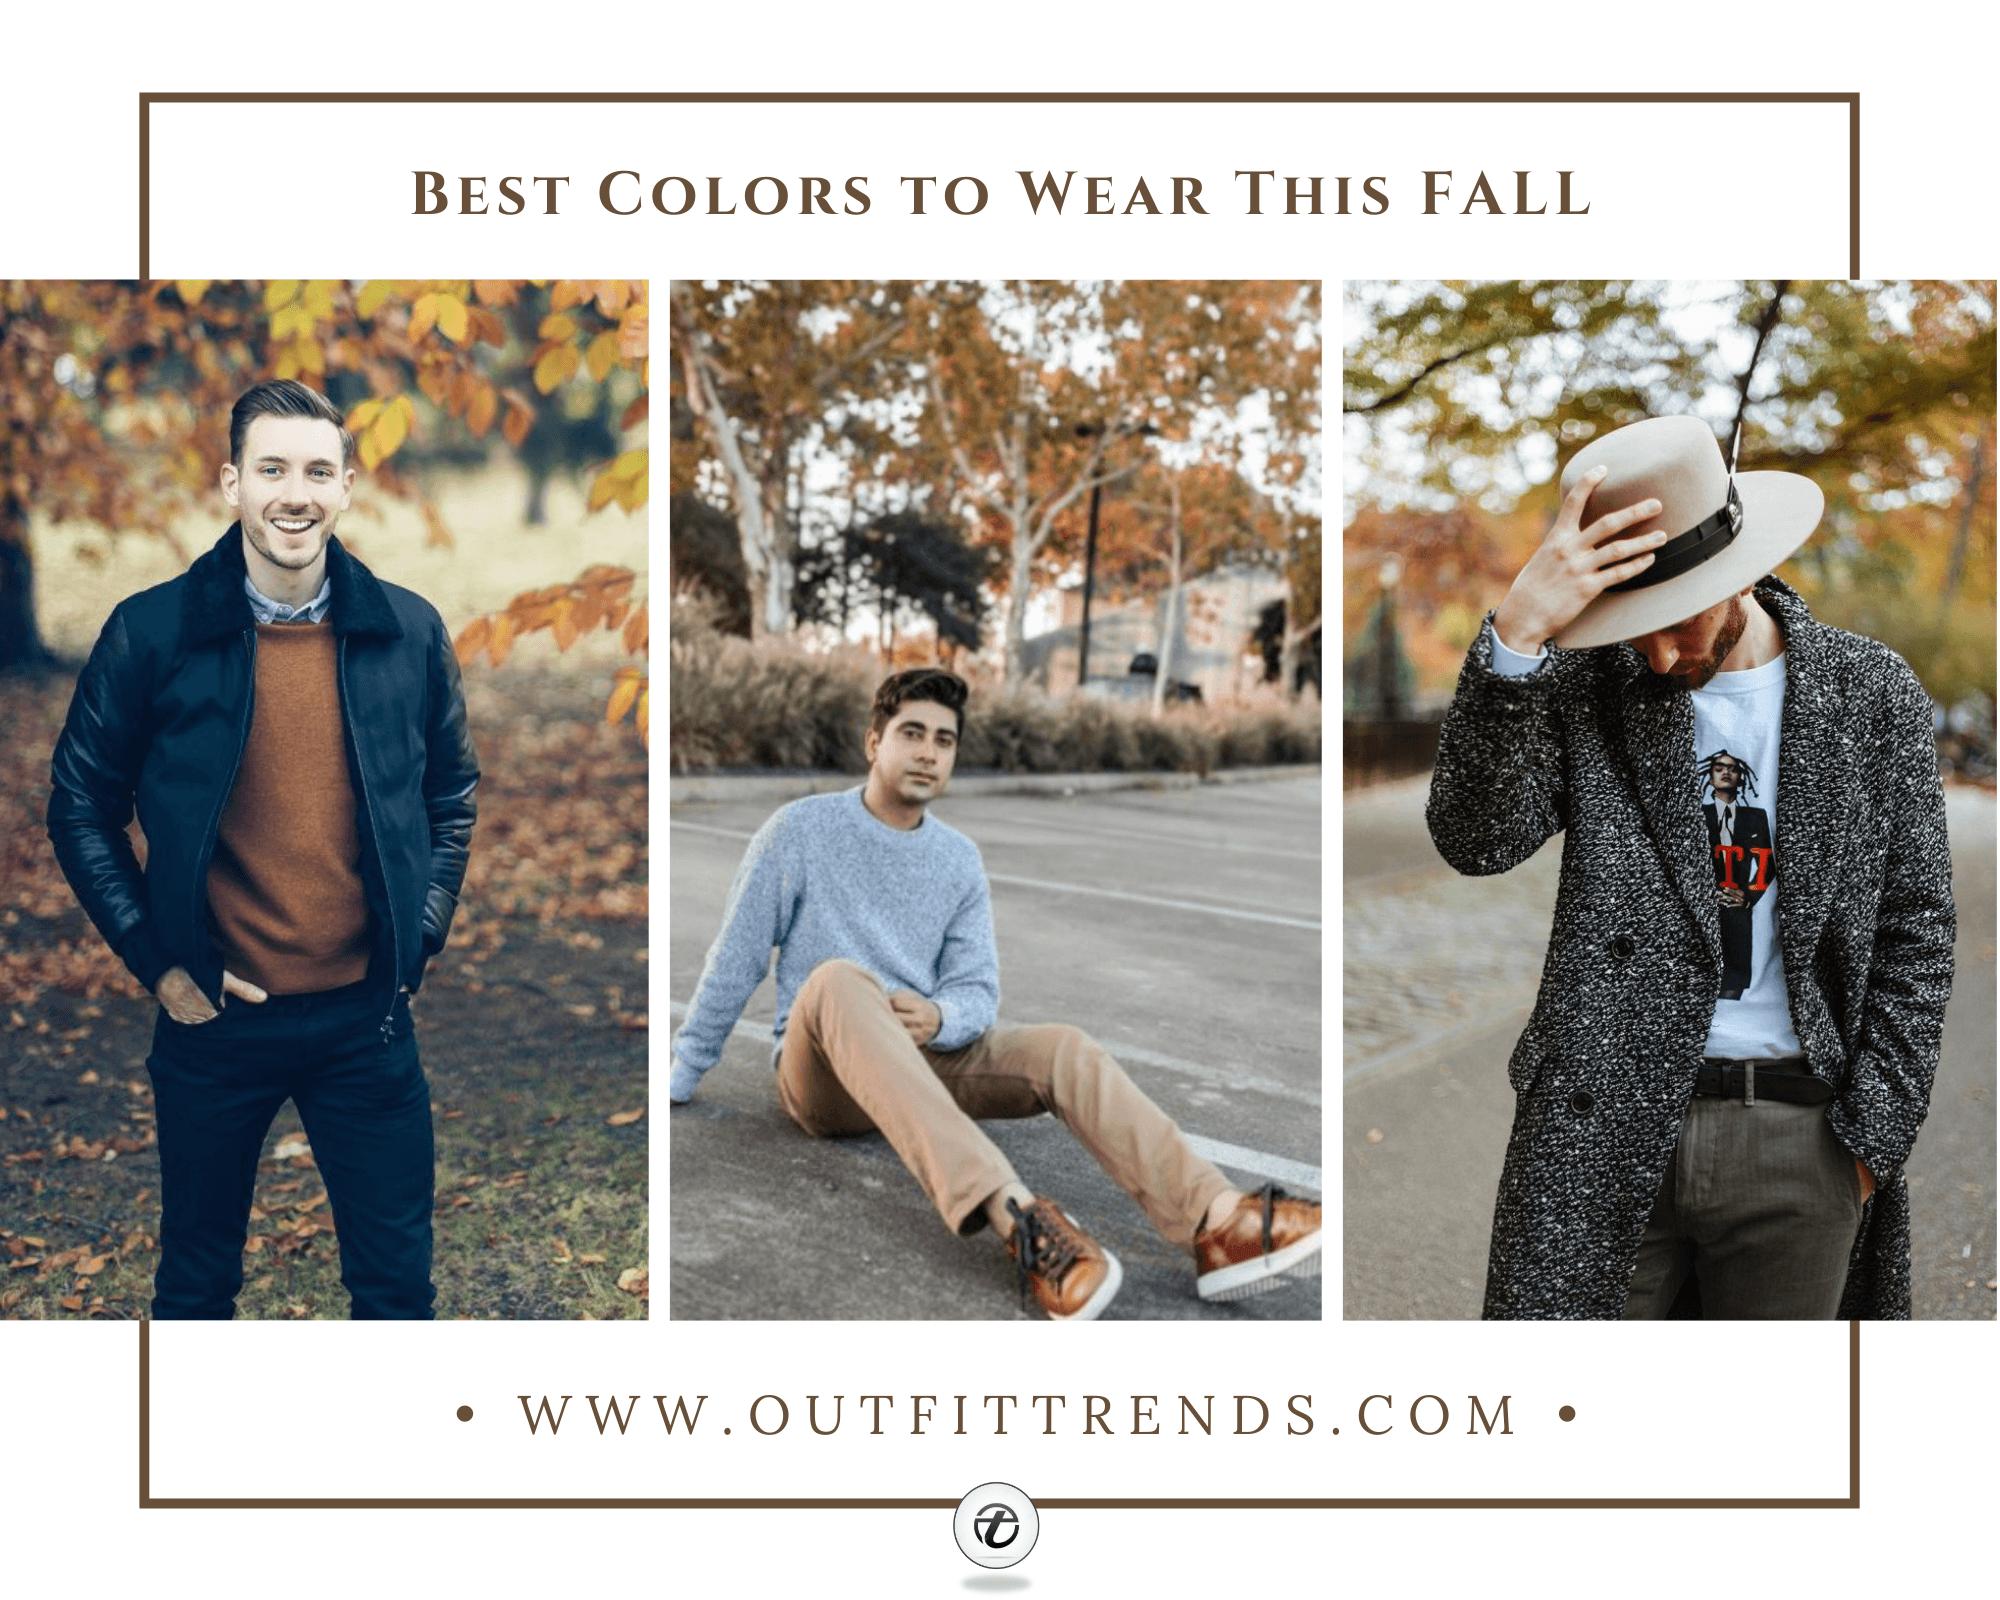 Men’s Fall Colors – 22 Best Colors & Combinations to Wear